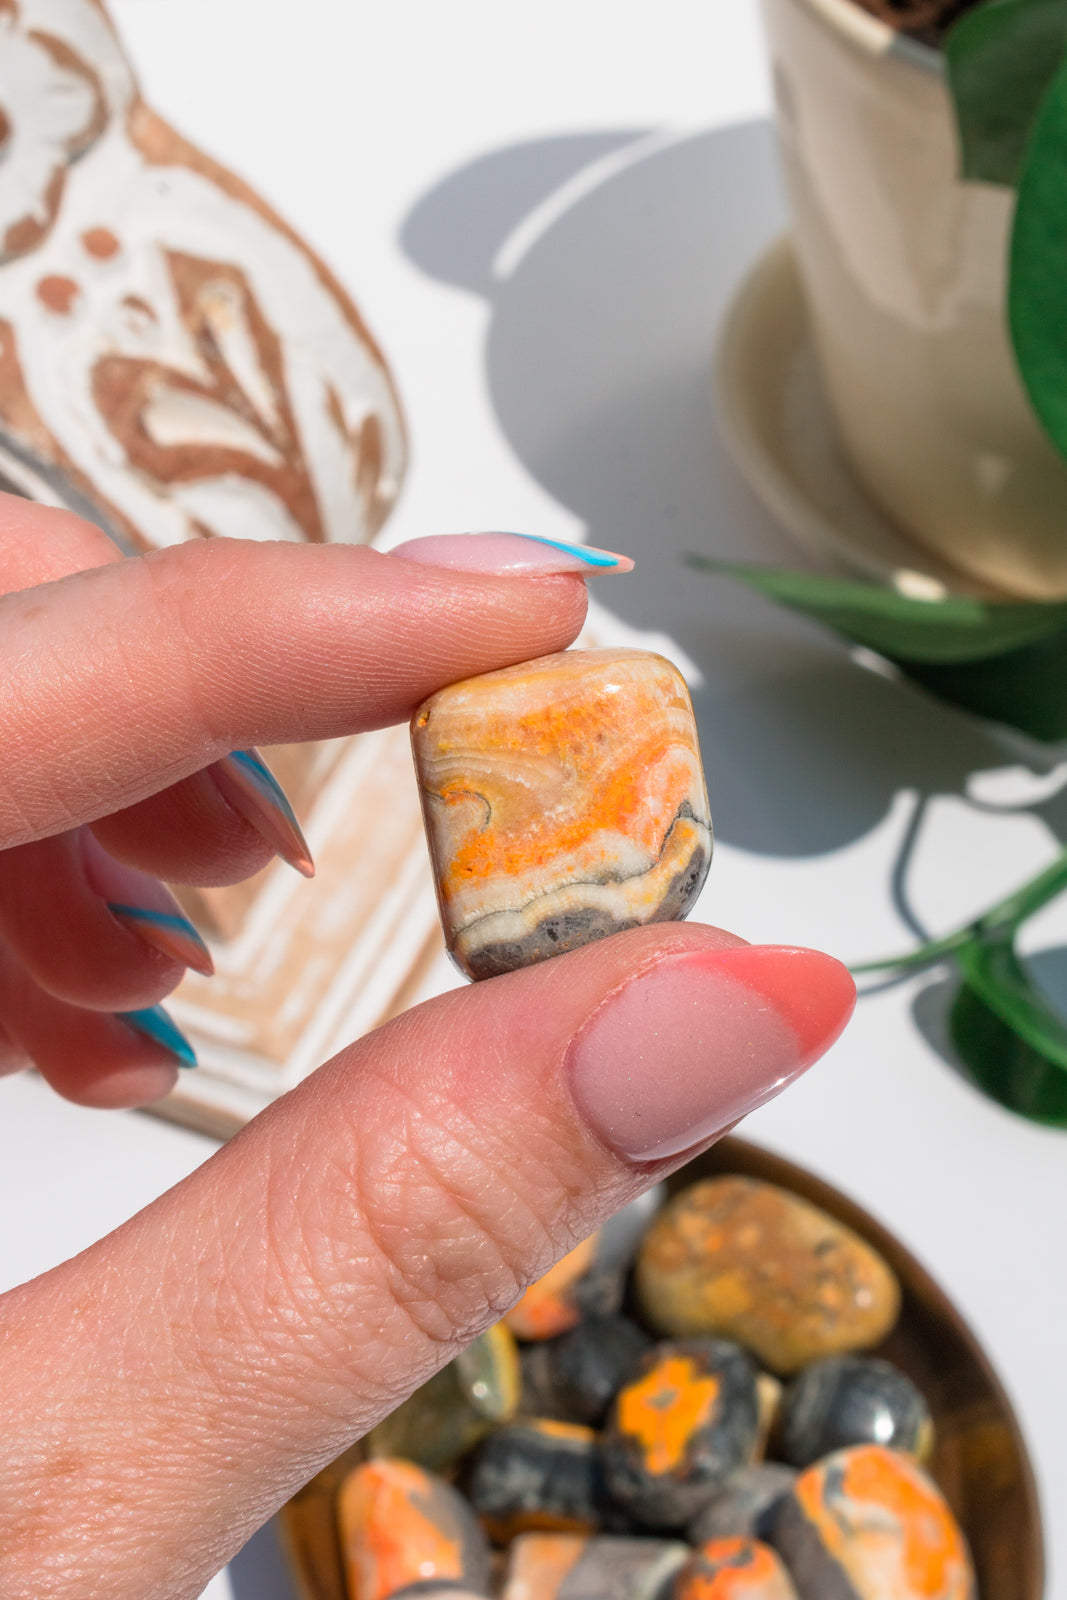 Load image into Gallery viewer, Bumblebee Jasper Tumbled Stone
